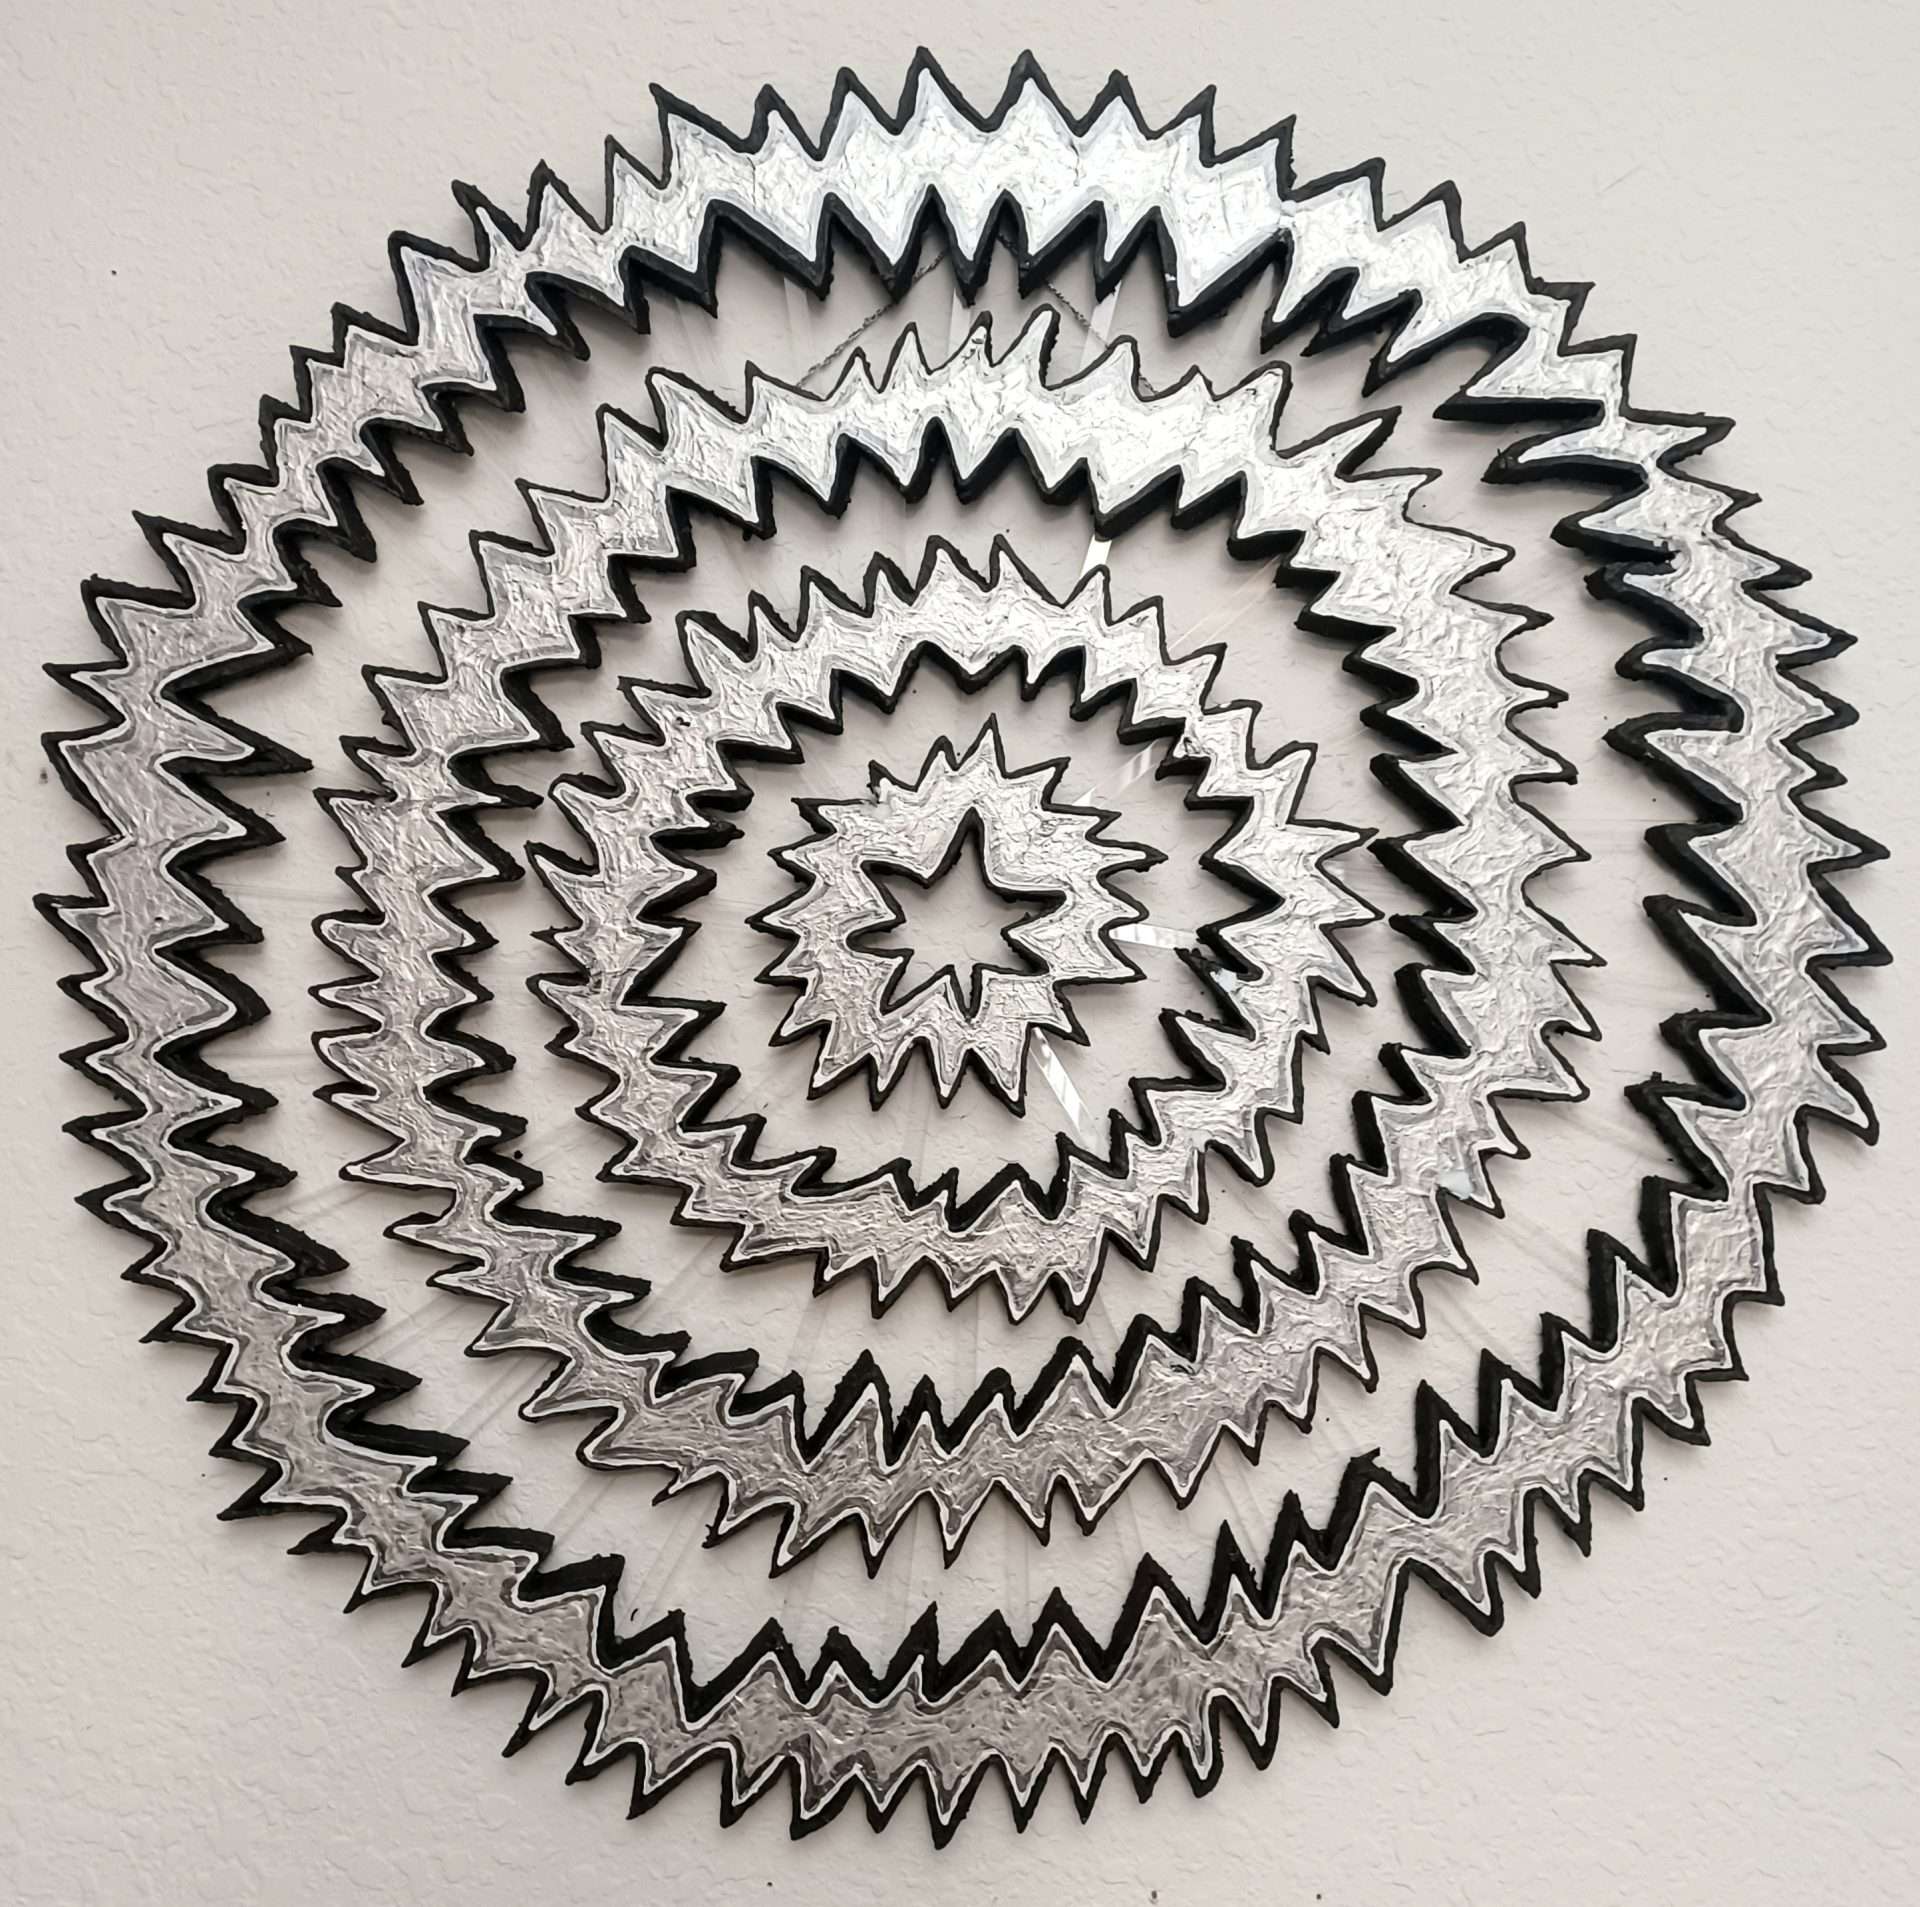 A silver spiral formed from metallic vinyl.